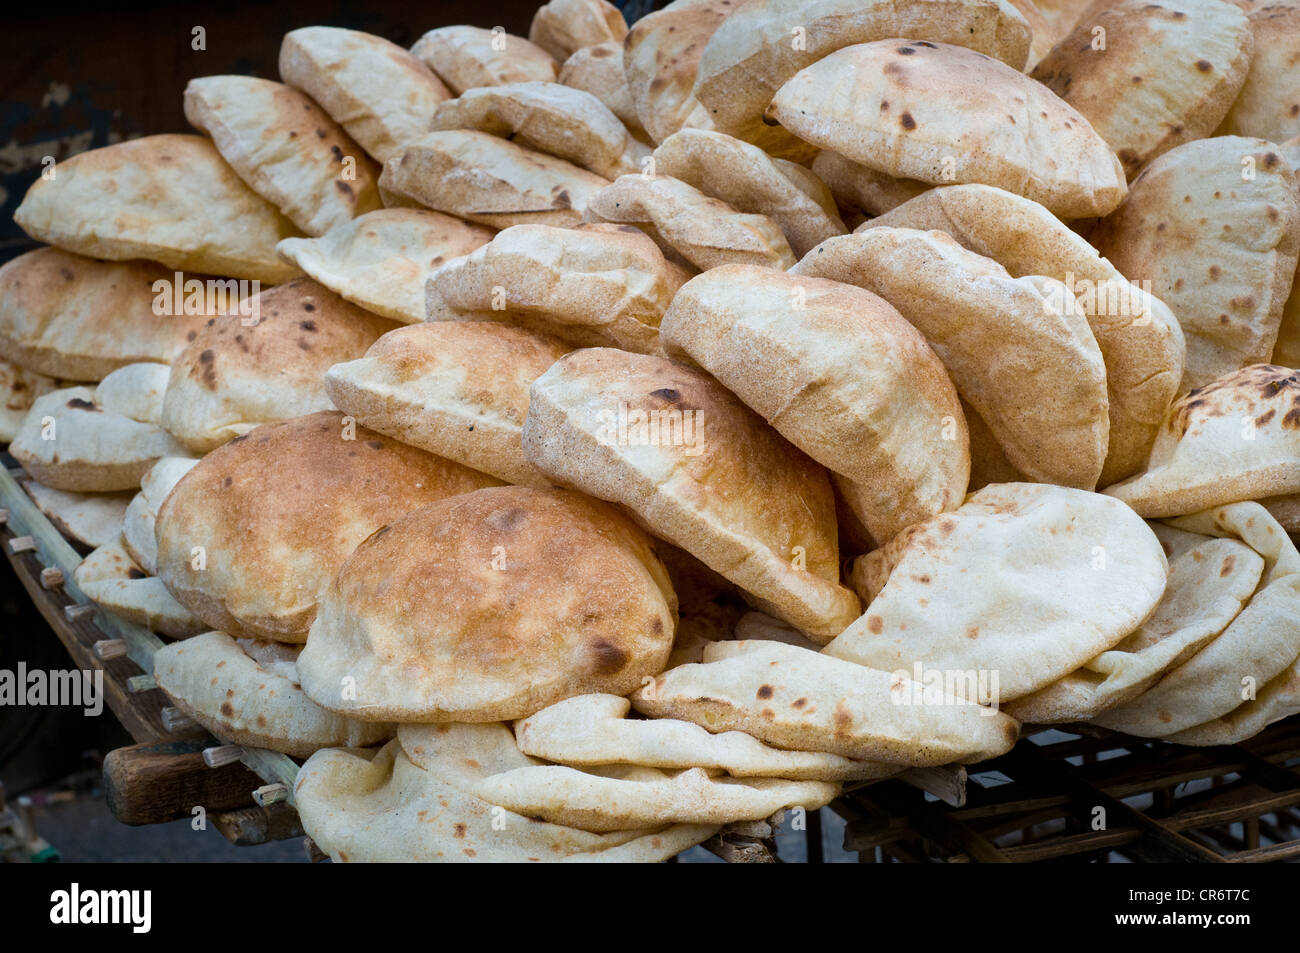 Egyptian Bread High Resolution Stock Photography and Images - Alamy